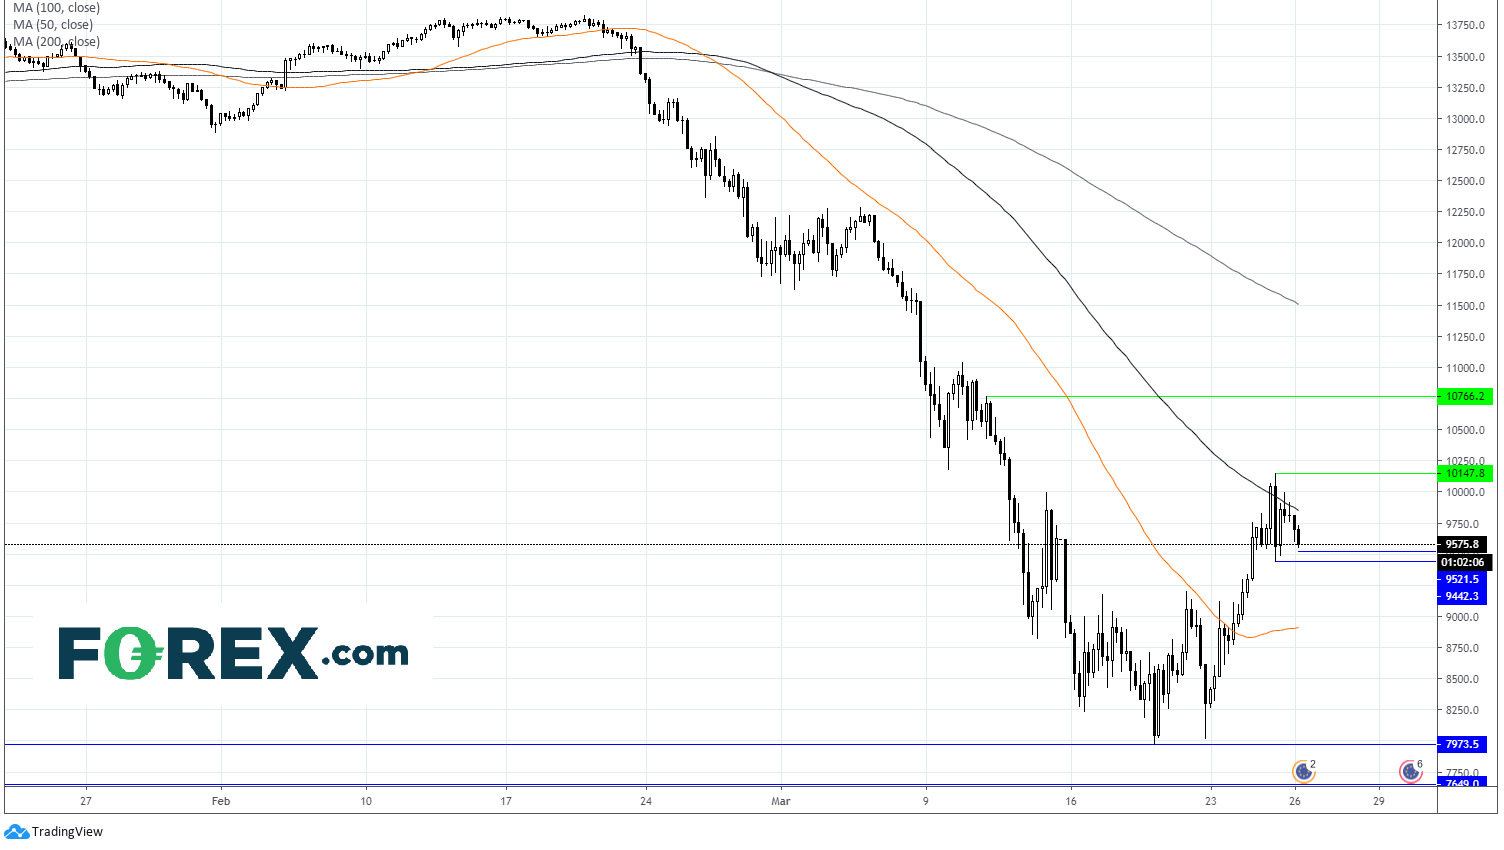 Chart tracking the DAX showing decline trends. Published in March 2020 by FOREX.com